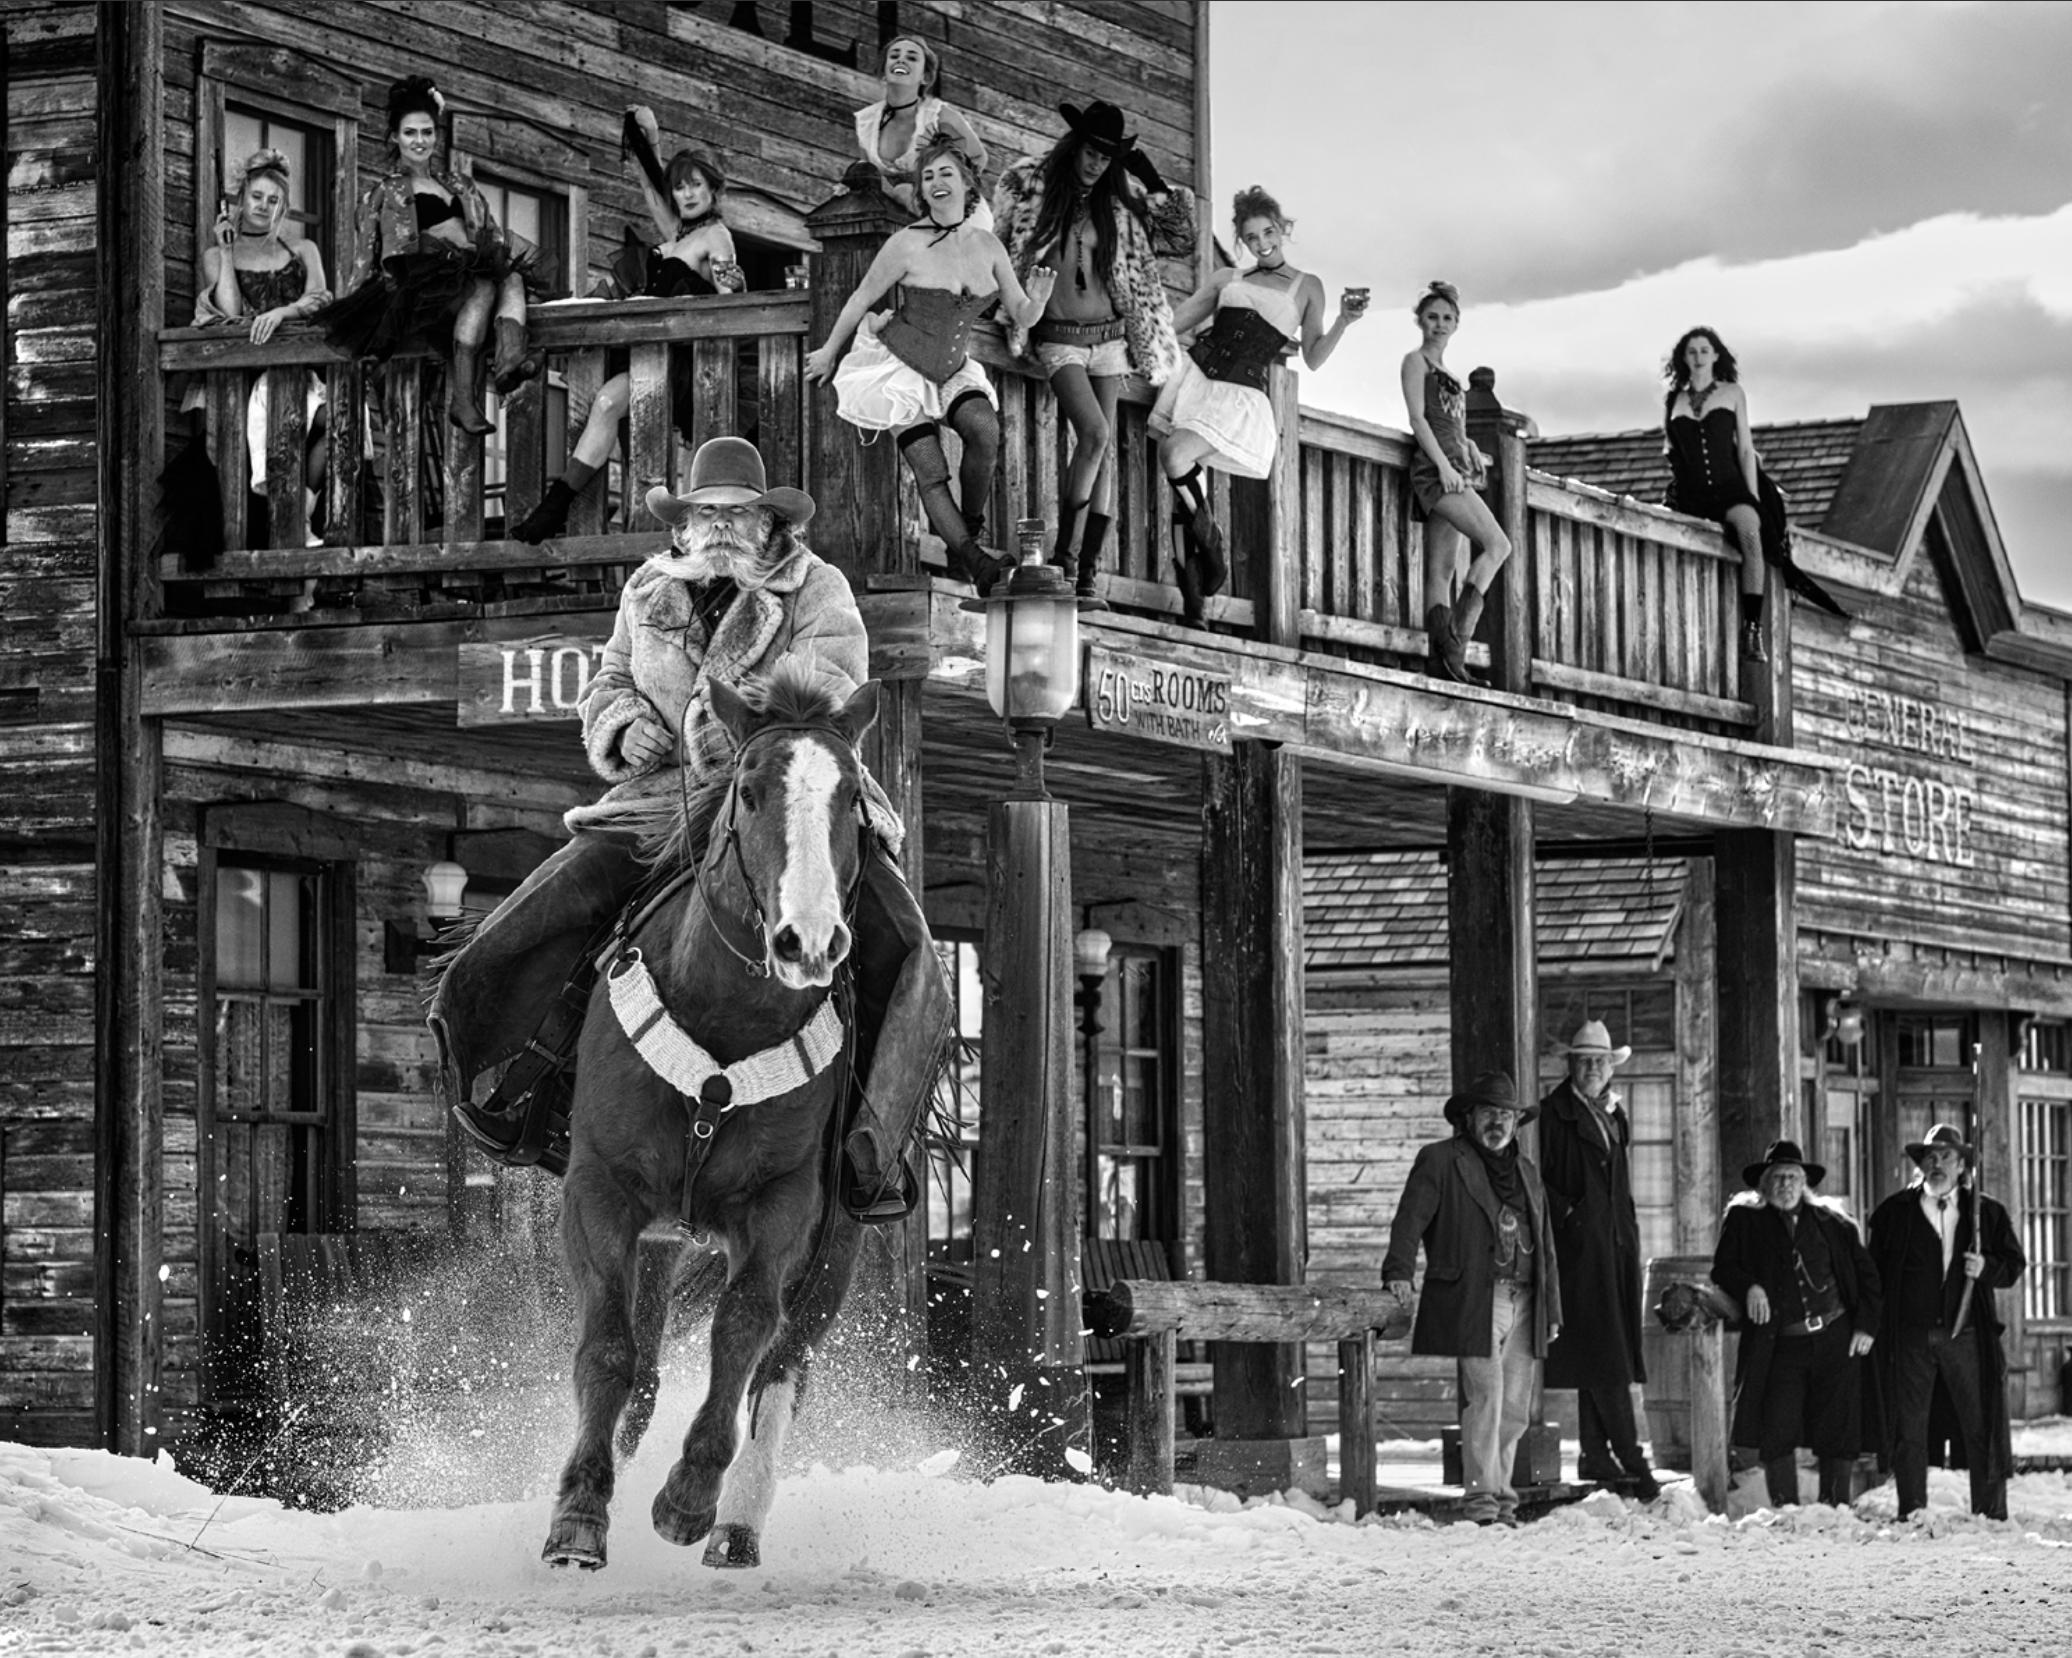 David Yarrow Black and White Photograph - Mamas Don't Let Your Babies Grow Up To Be Cowboys